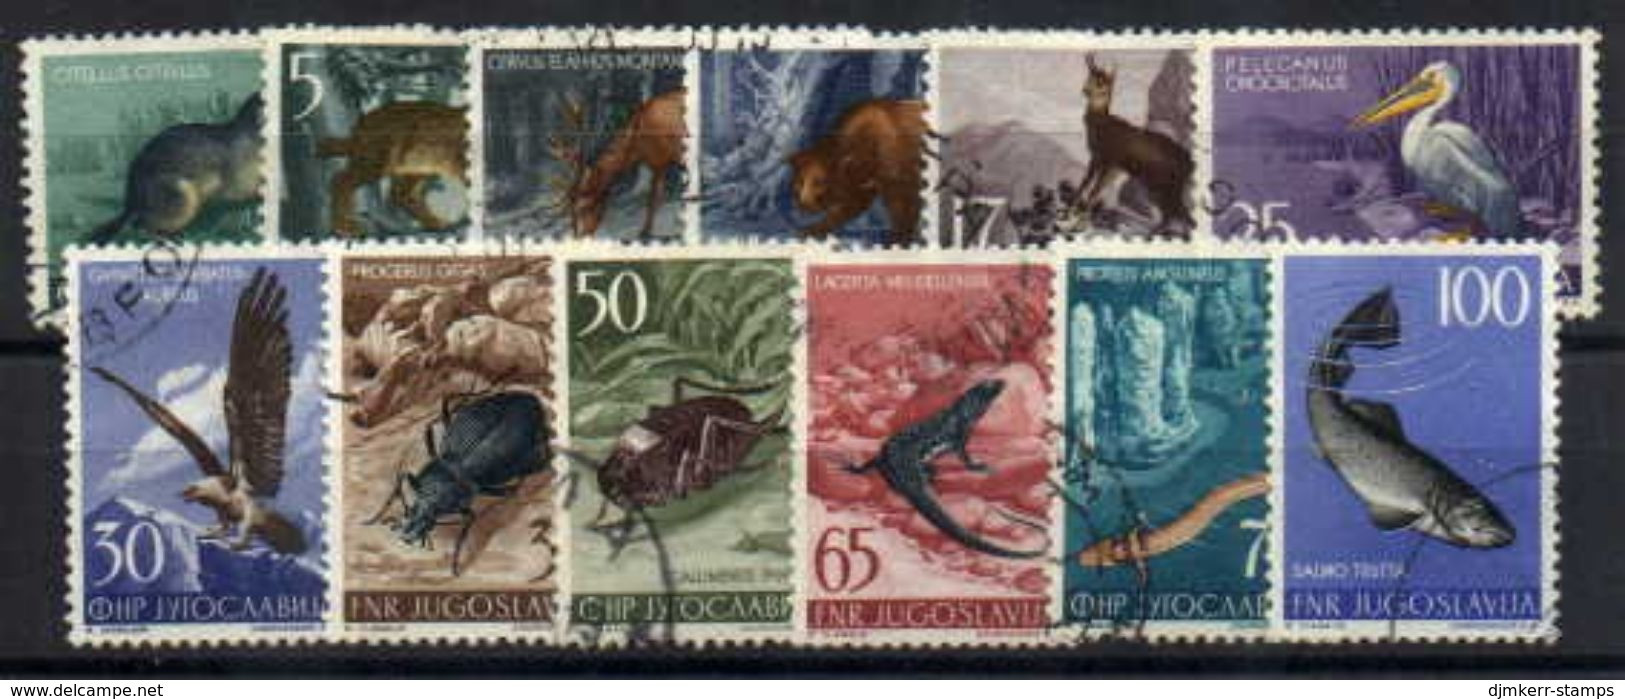 YUGOSLAVIA 1954 Fauna Set Of 12, Used.  Michel 738-749 - Used Stamps